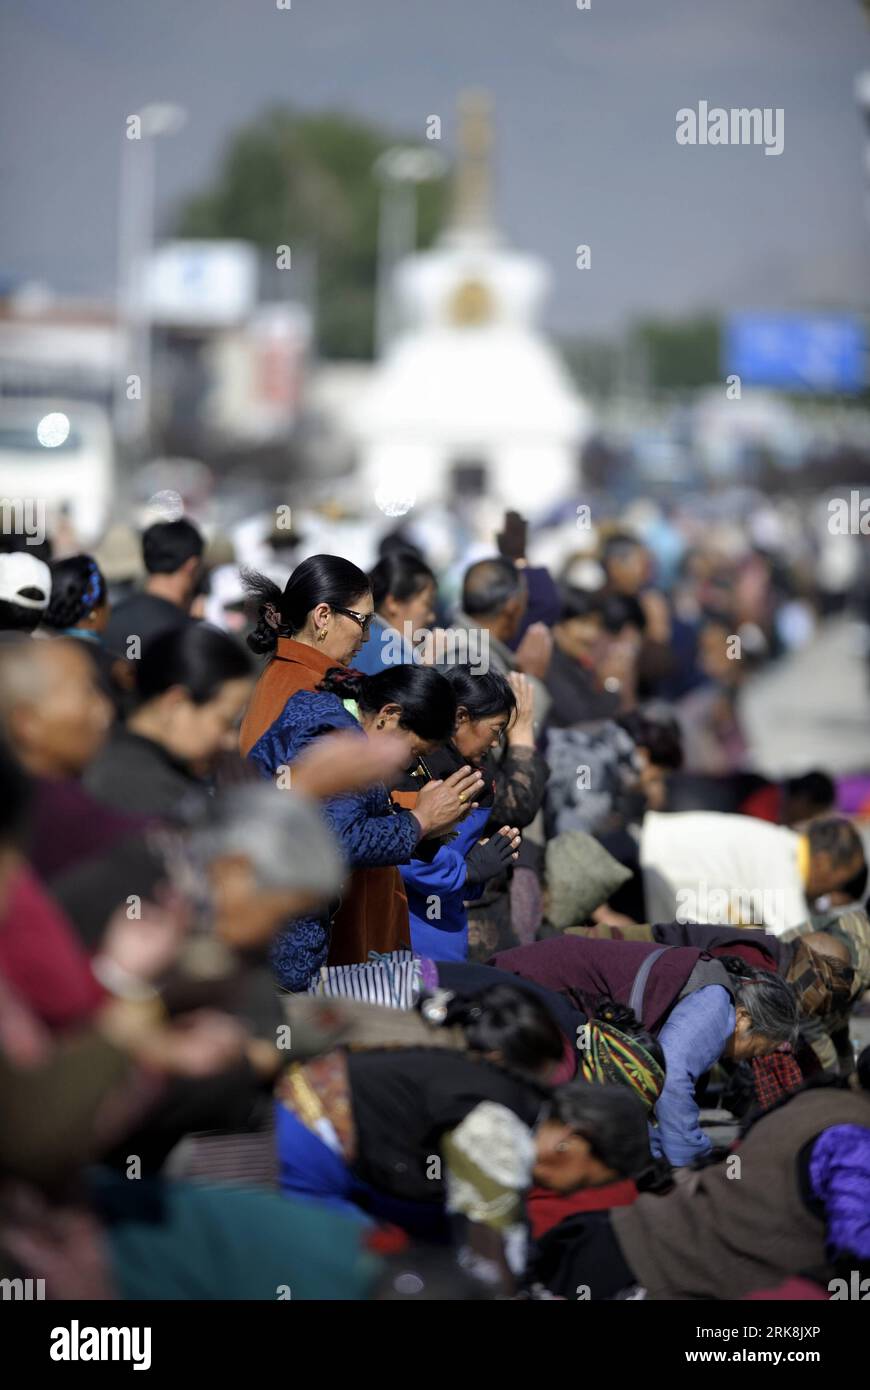 Bildnummer: 54047322  Datum: 14.05.2010  Copyright: imago/Xinhua (100514)-- LHASA, May 14, 2010 (Xinhua) -- Tibetan ethnic pray in front of the Potala Palace in Lhasa, capital of southwest China s Tibet Autonomous Region on May 14, (April 1 on Tibetan calendar) 2010, the first day of Saga Dawa Festival, which will last for one month. The festival marks the birth, enlightenment and death of Sakyamuni. (Xinhua/Purbu Zhaxi) (ypf) (3)CHINA-TIBET-SAGA DAWA FESTIVAL(CN) PUBLICATIONxNOTxINxCHN Gesellschaft Religion premiumd xint kbdig xsk 2010 hoch     Bildnummer 54047322 Date 14 05 2010 Copyright Im Stock Photo